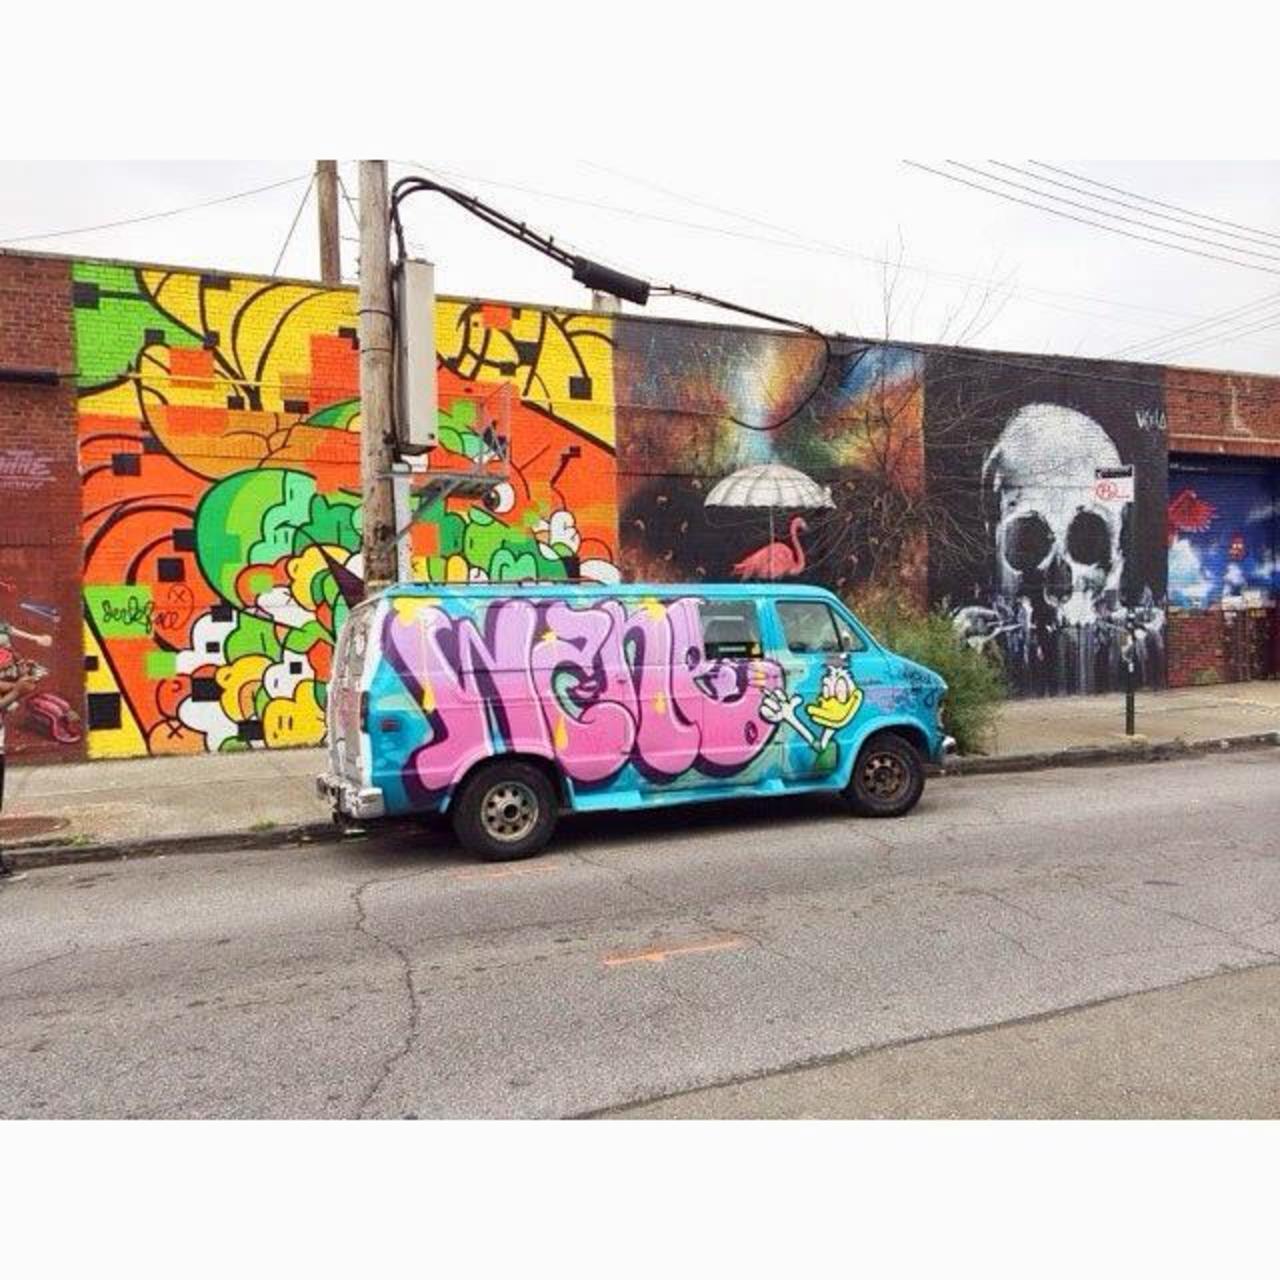 I saw this van in #brooklyn . Does anyone know of the #artist ? #streetart #graffiti http://t.co/lyxLYLLCDc